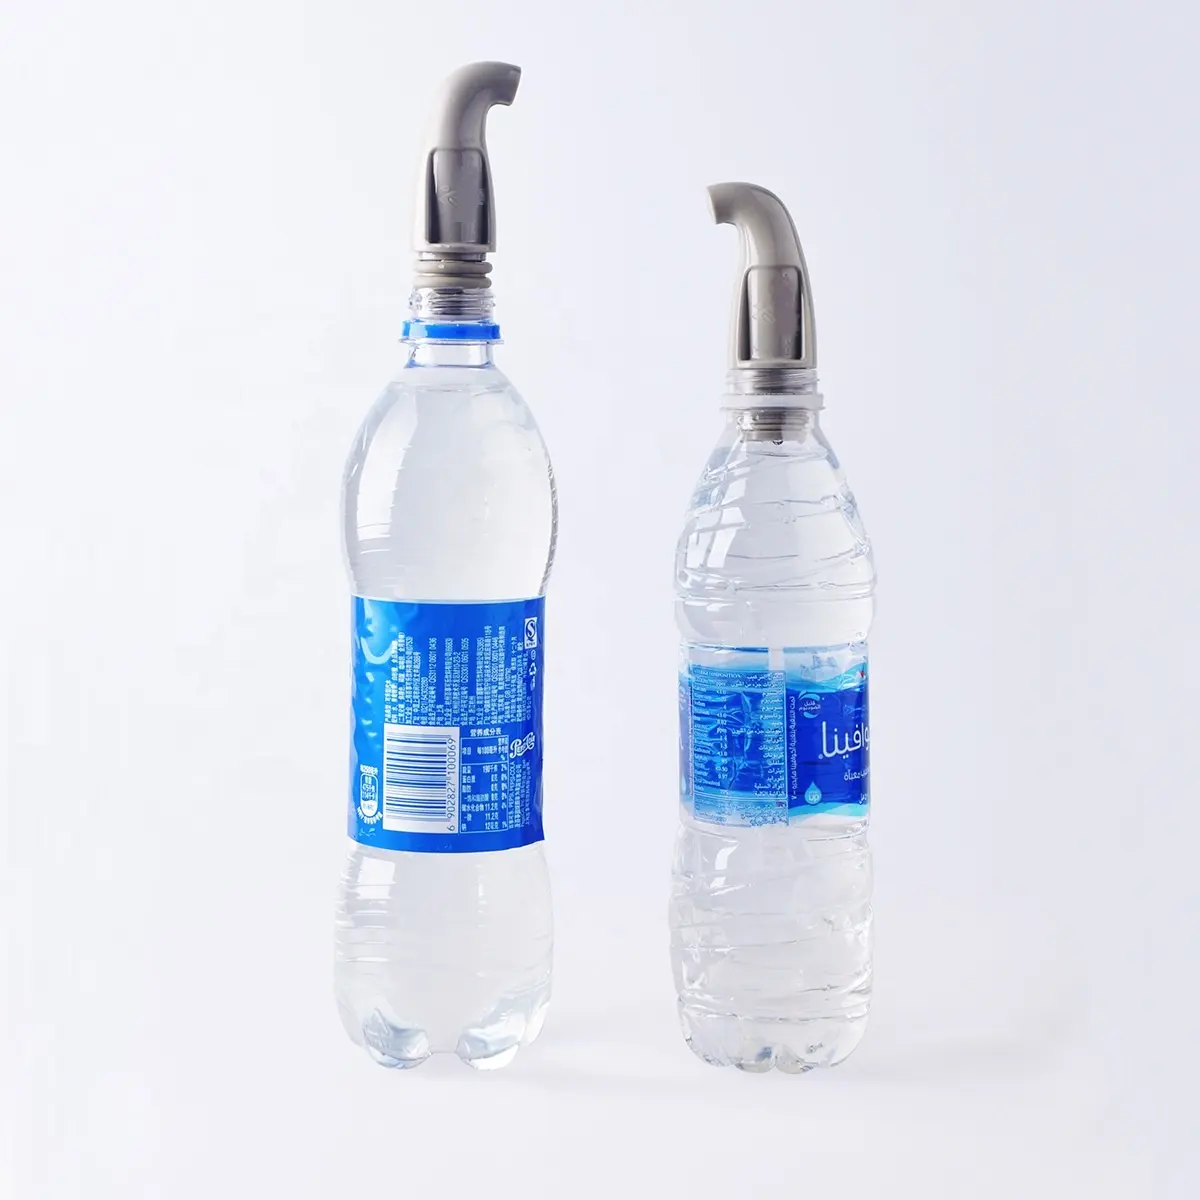 Portable bidet 1pc pack, Compatible with most Bottles for Washing. Travel shattaf Plastic, Feminine hygiene Douches.